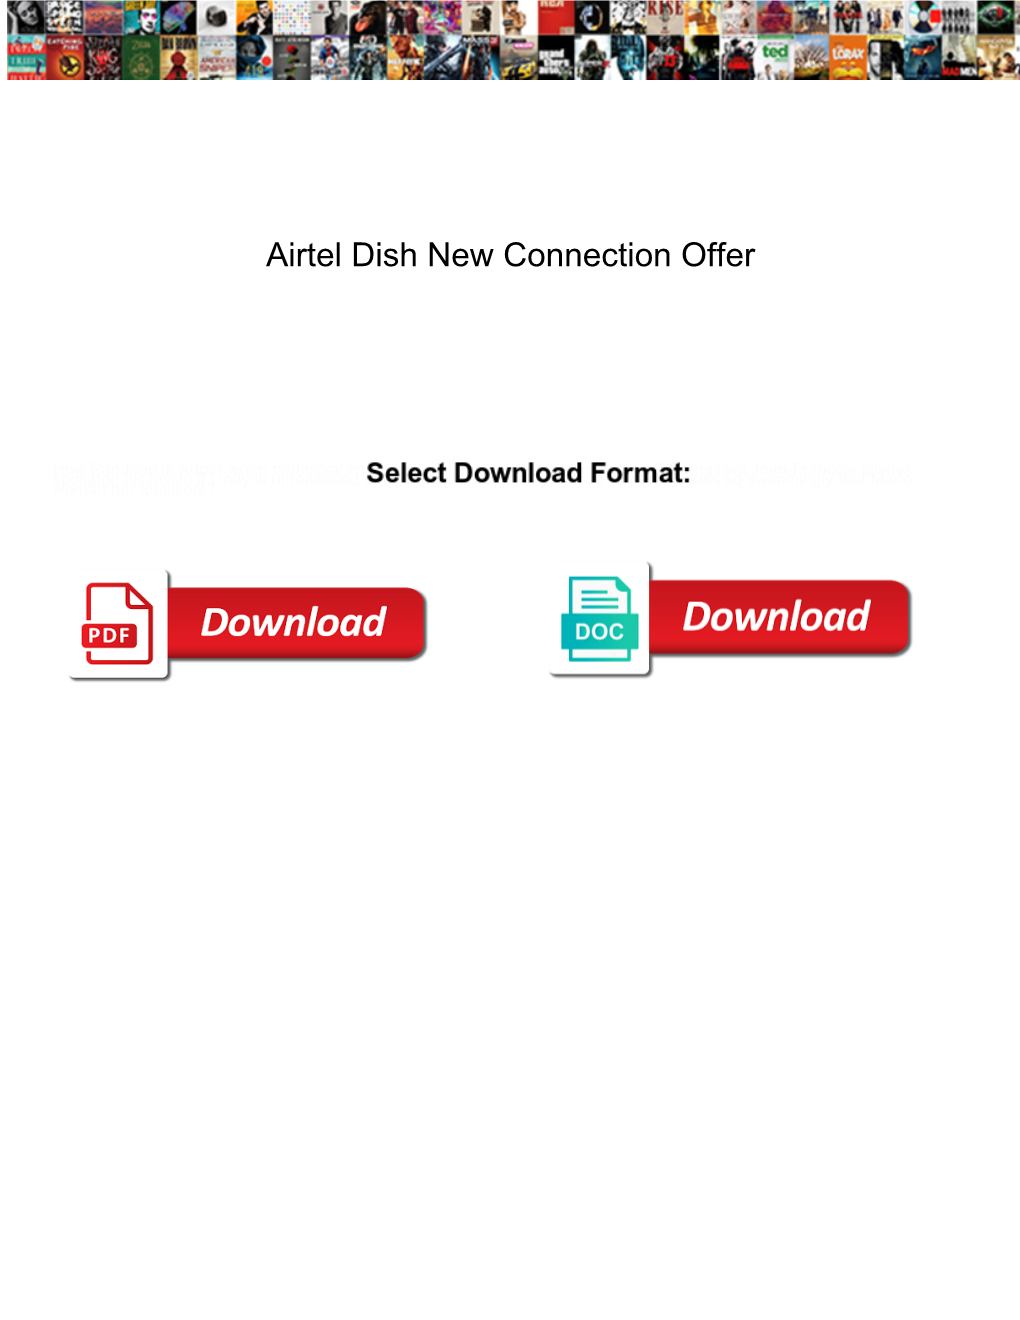 Airtel Dish New Connection Offer